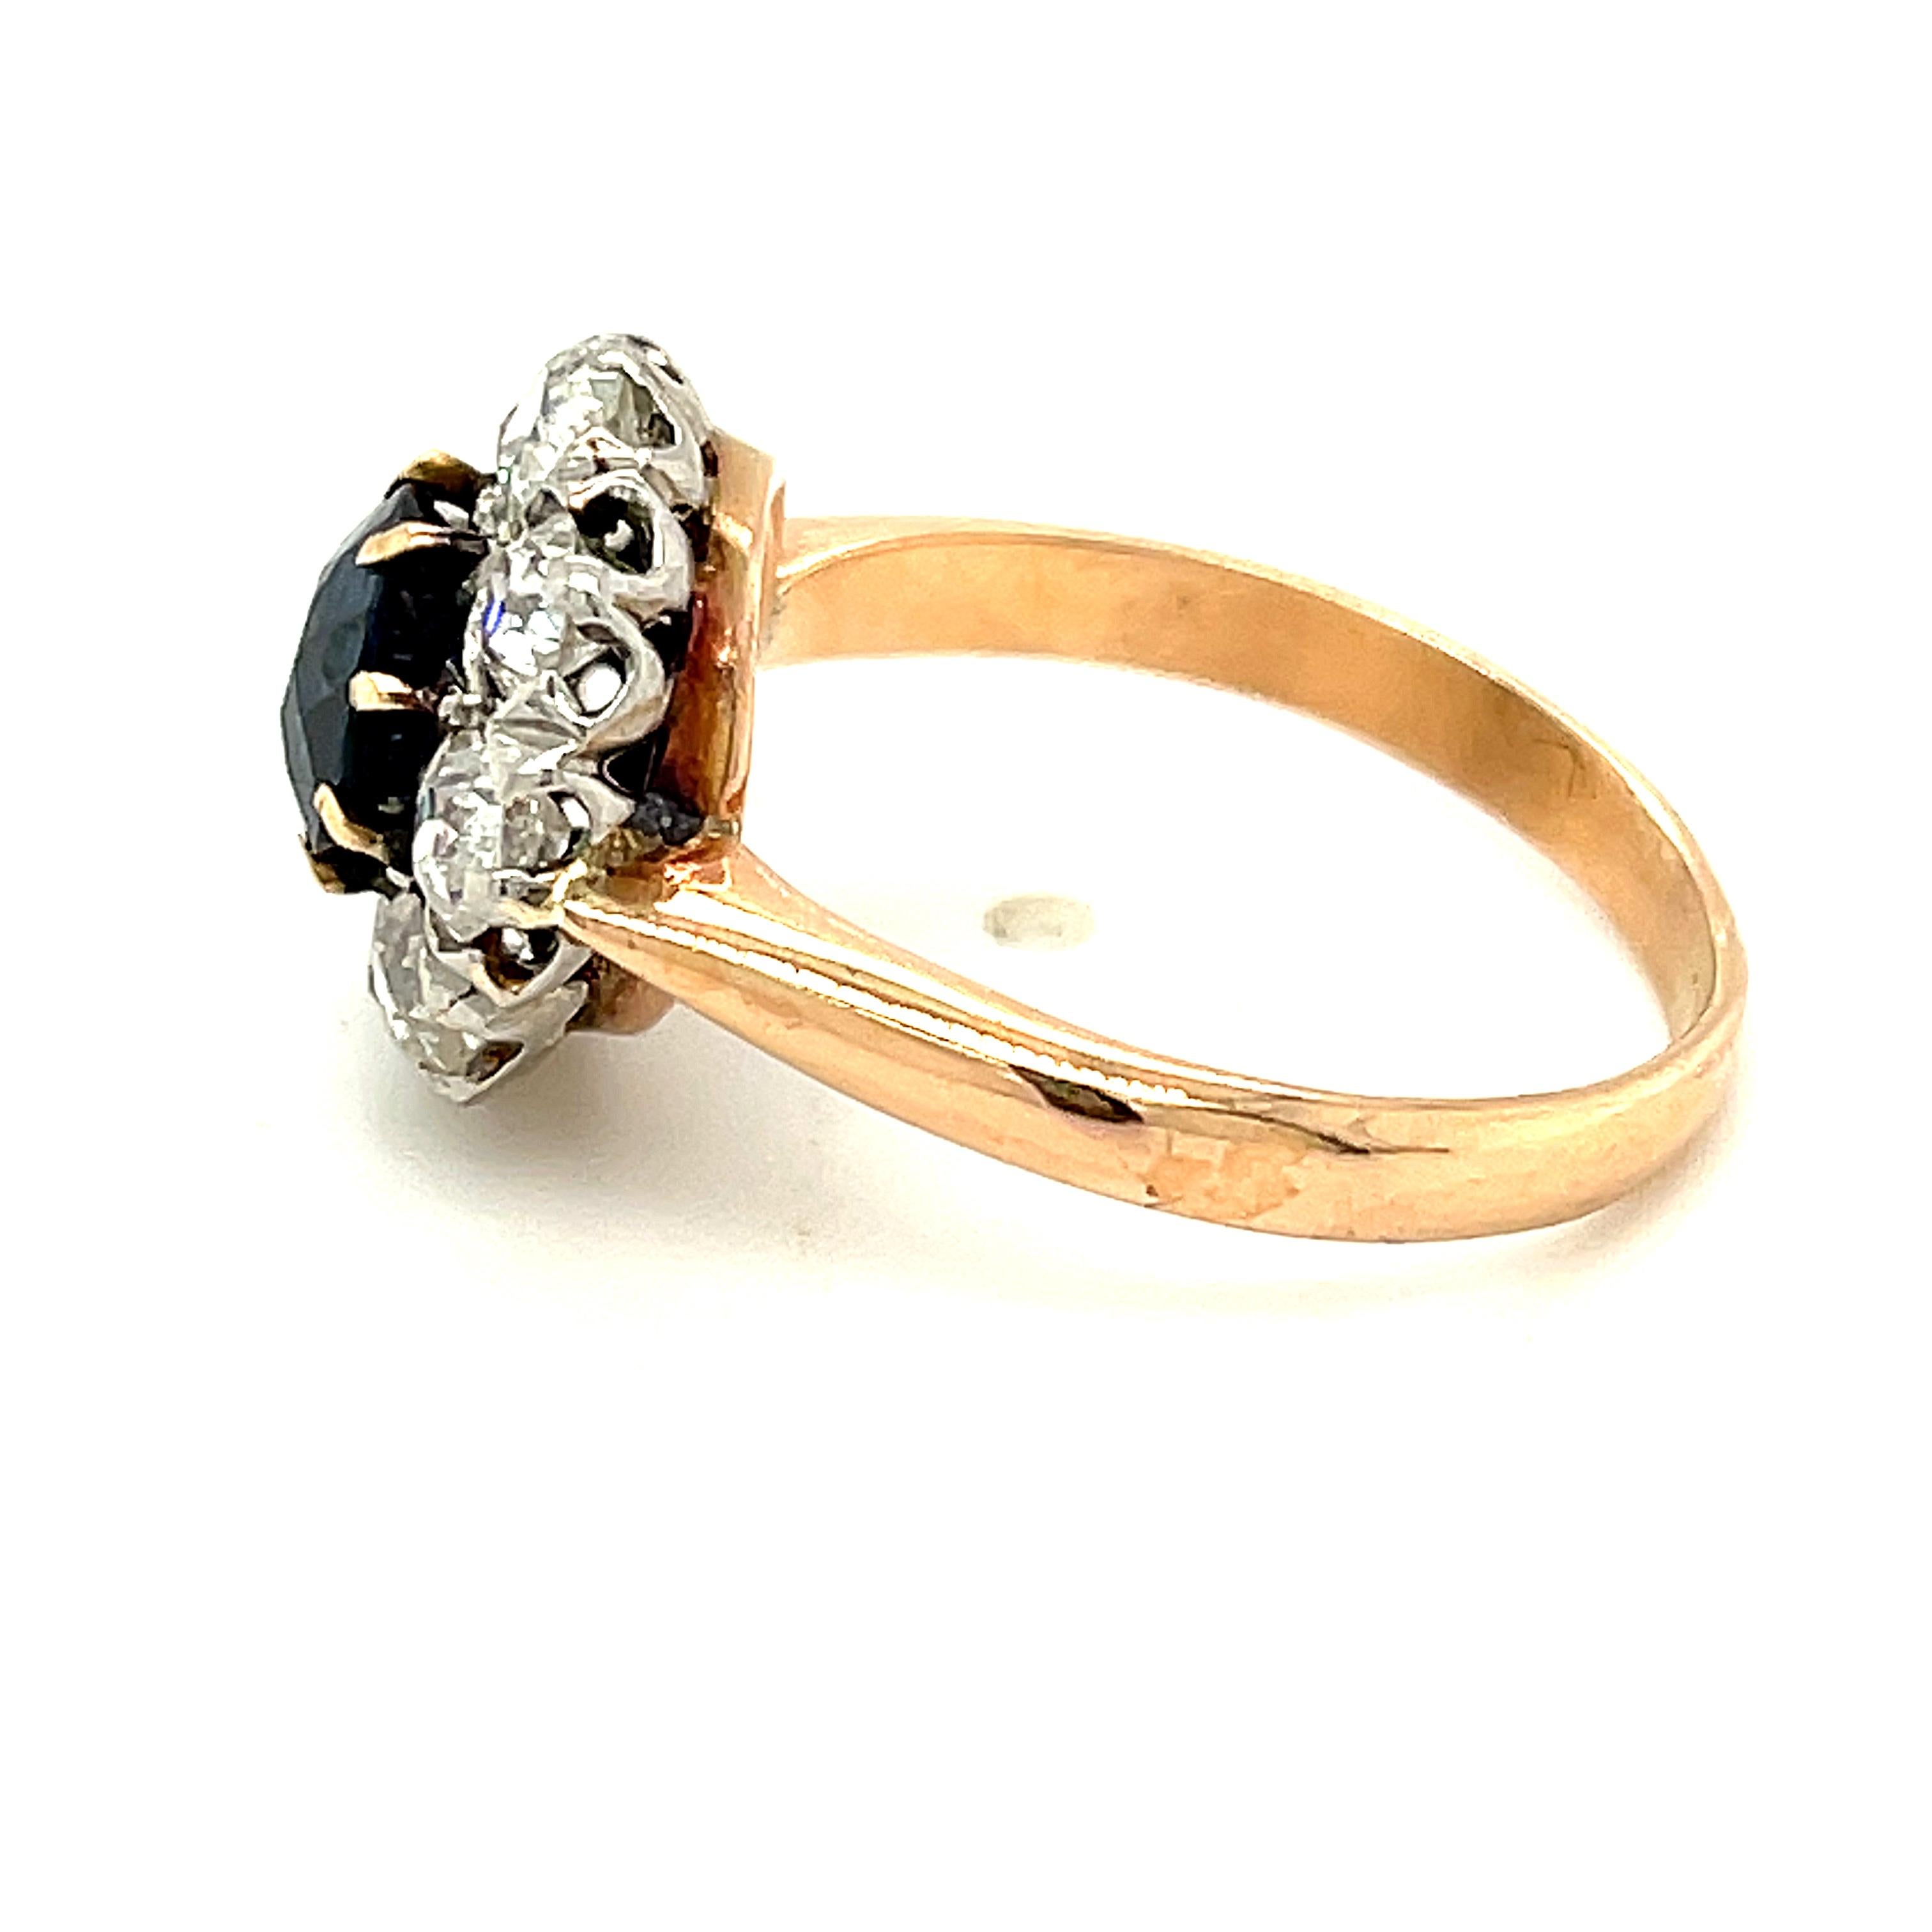 An antique sapphire and diamond cluster ring set in 18k gold with a rose hue to it, circa 1890. The sapphire is a round cut, a dark rich blue color and weighs approximately 1.00 carats. There are 8 old mine cut diamonds in the surround weighing